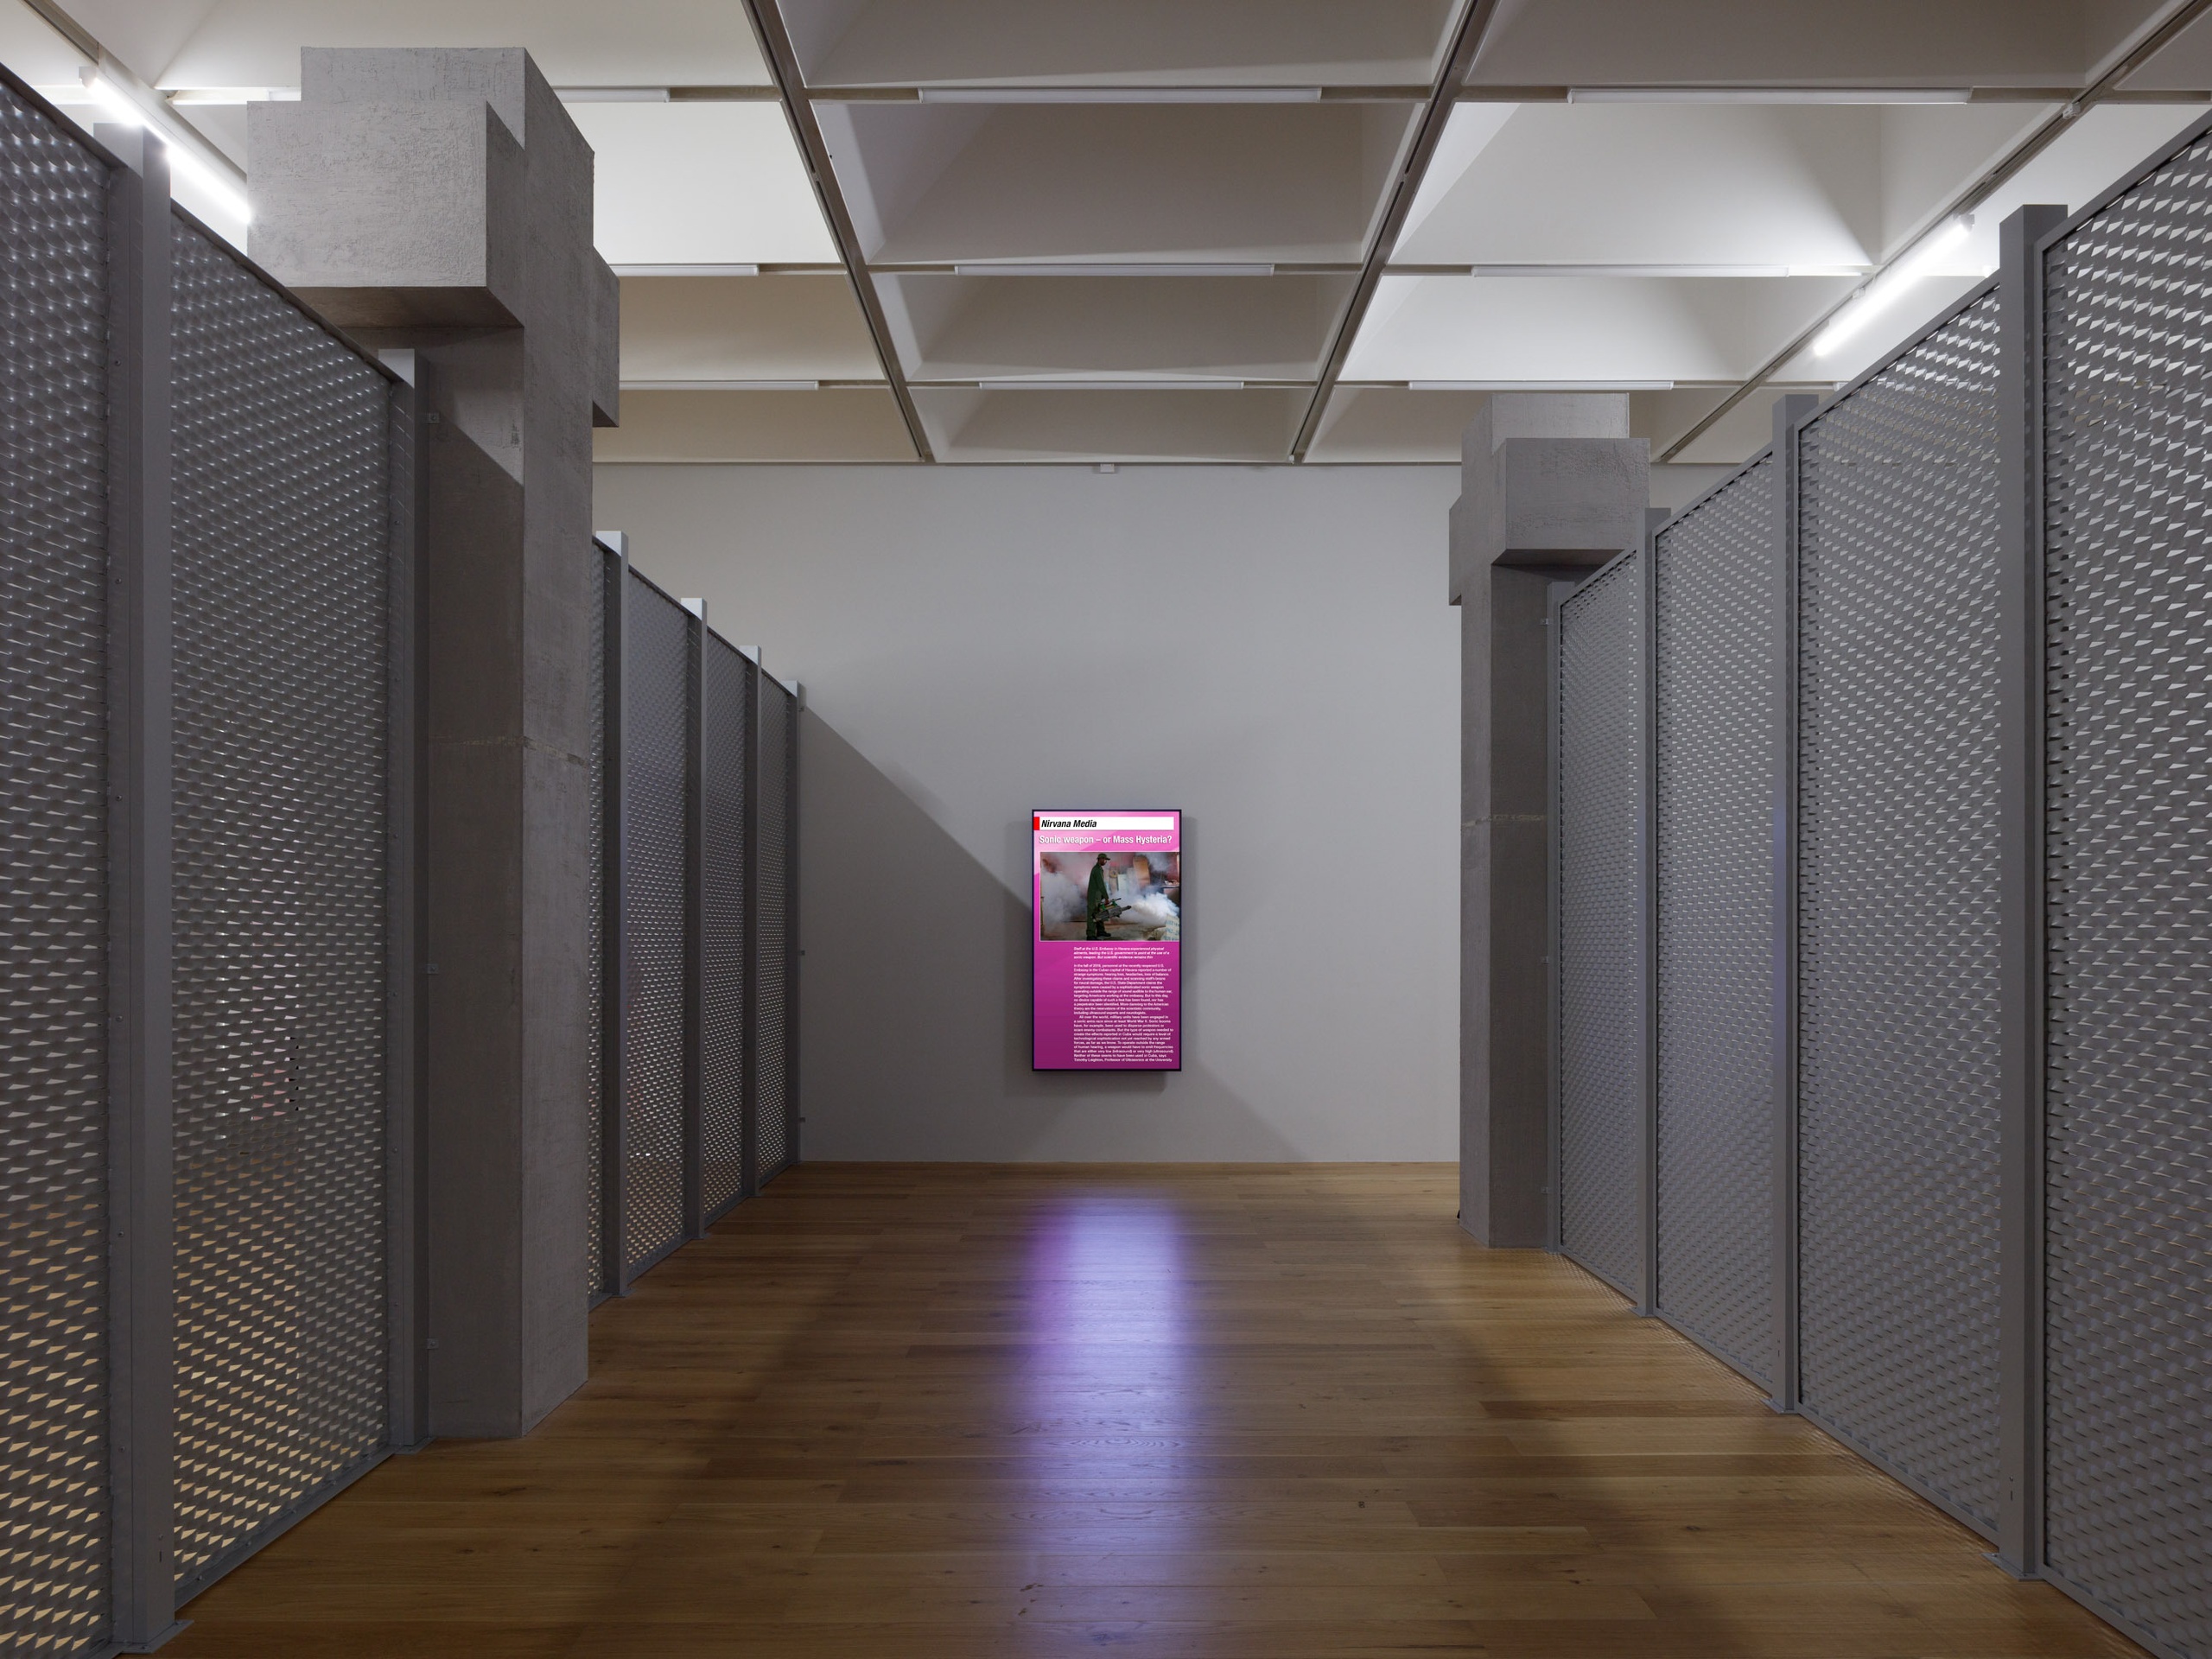 Installation view, Sung Tieu, In Cold Print, Nottingham Contemporary, Nottingham, 08 February - 31 August 2020